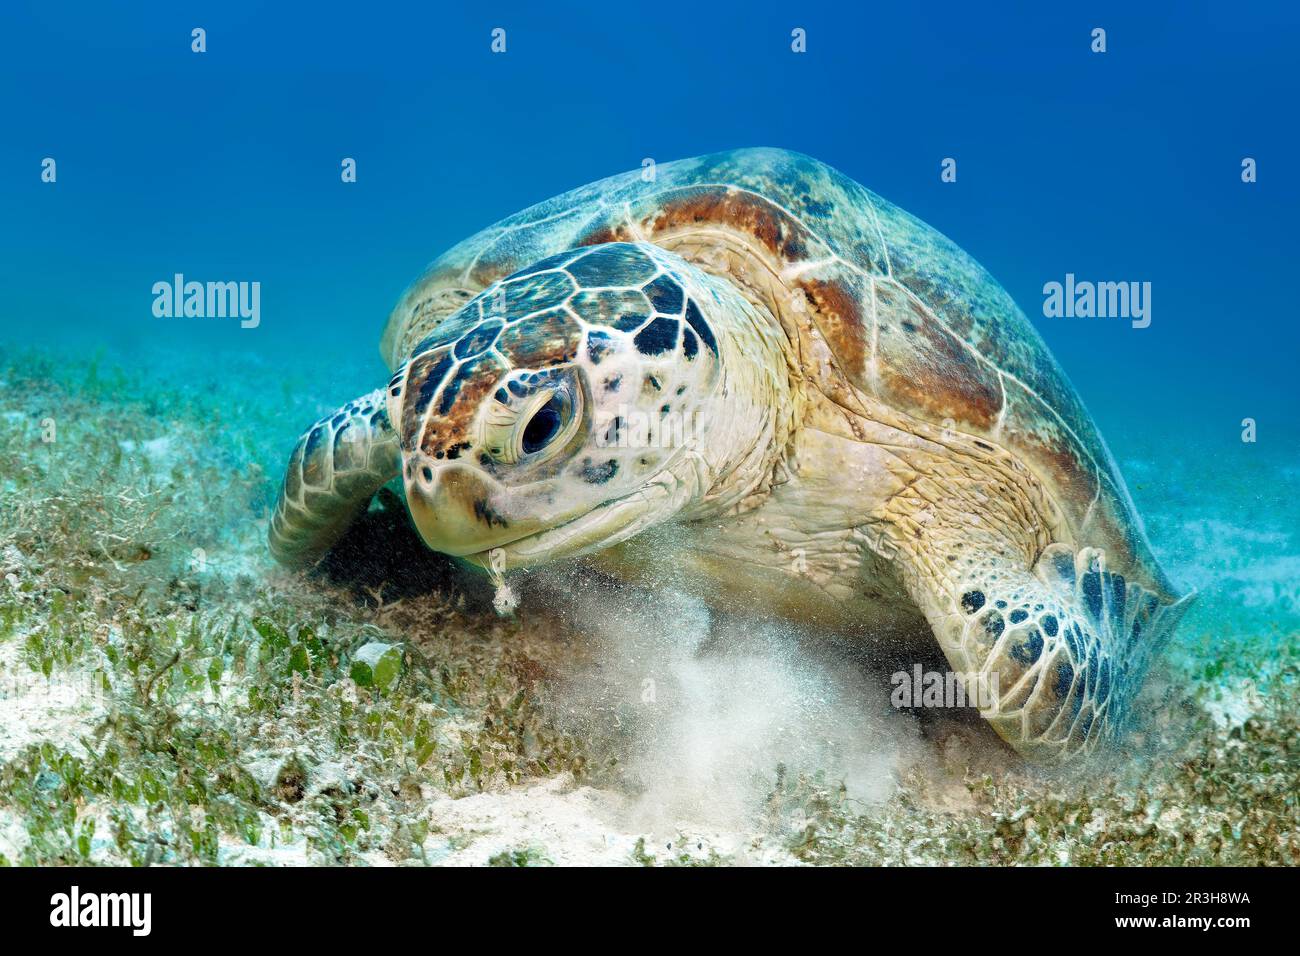 Green turtle (Chelonia mydas) or green turtle from the front, feeding, eating, seagrass Seagrass meadow, Sulu Sea, Pacific Ocean, Palawan, Calamian Stock Photo